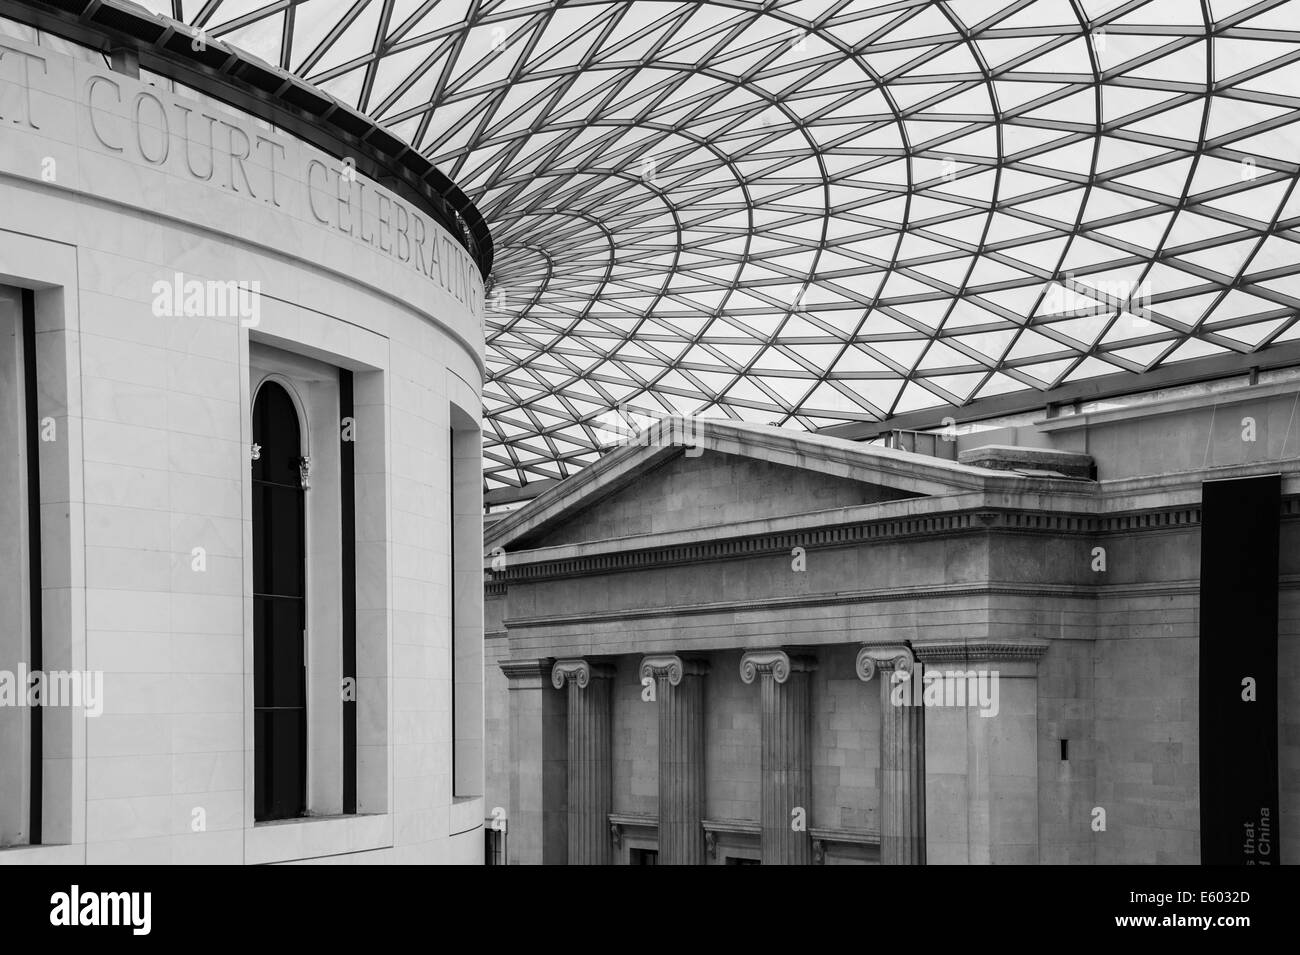 The Queen Elizabeth II Great Court in the British Museum, London, England. Stock Photo